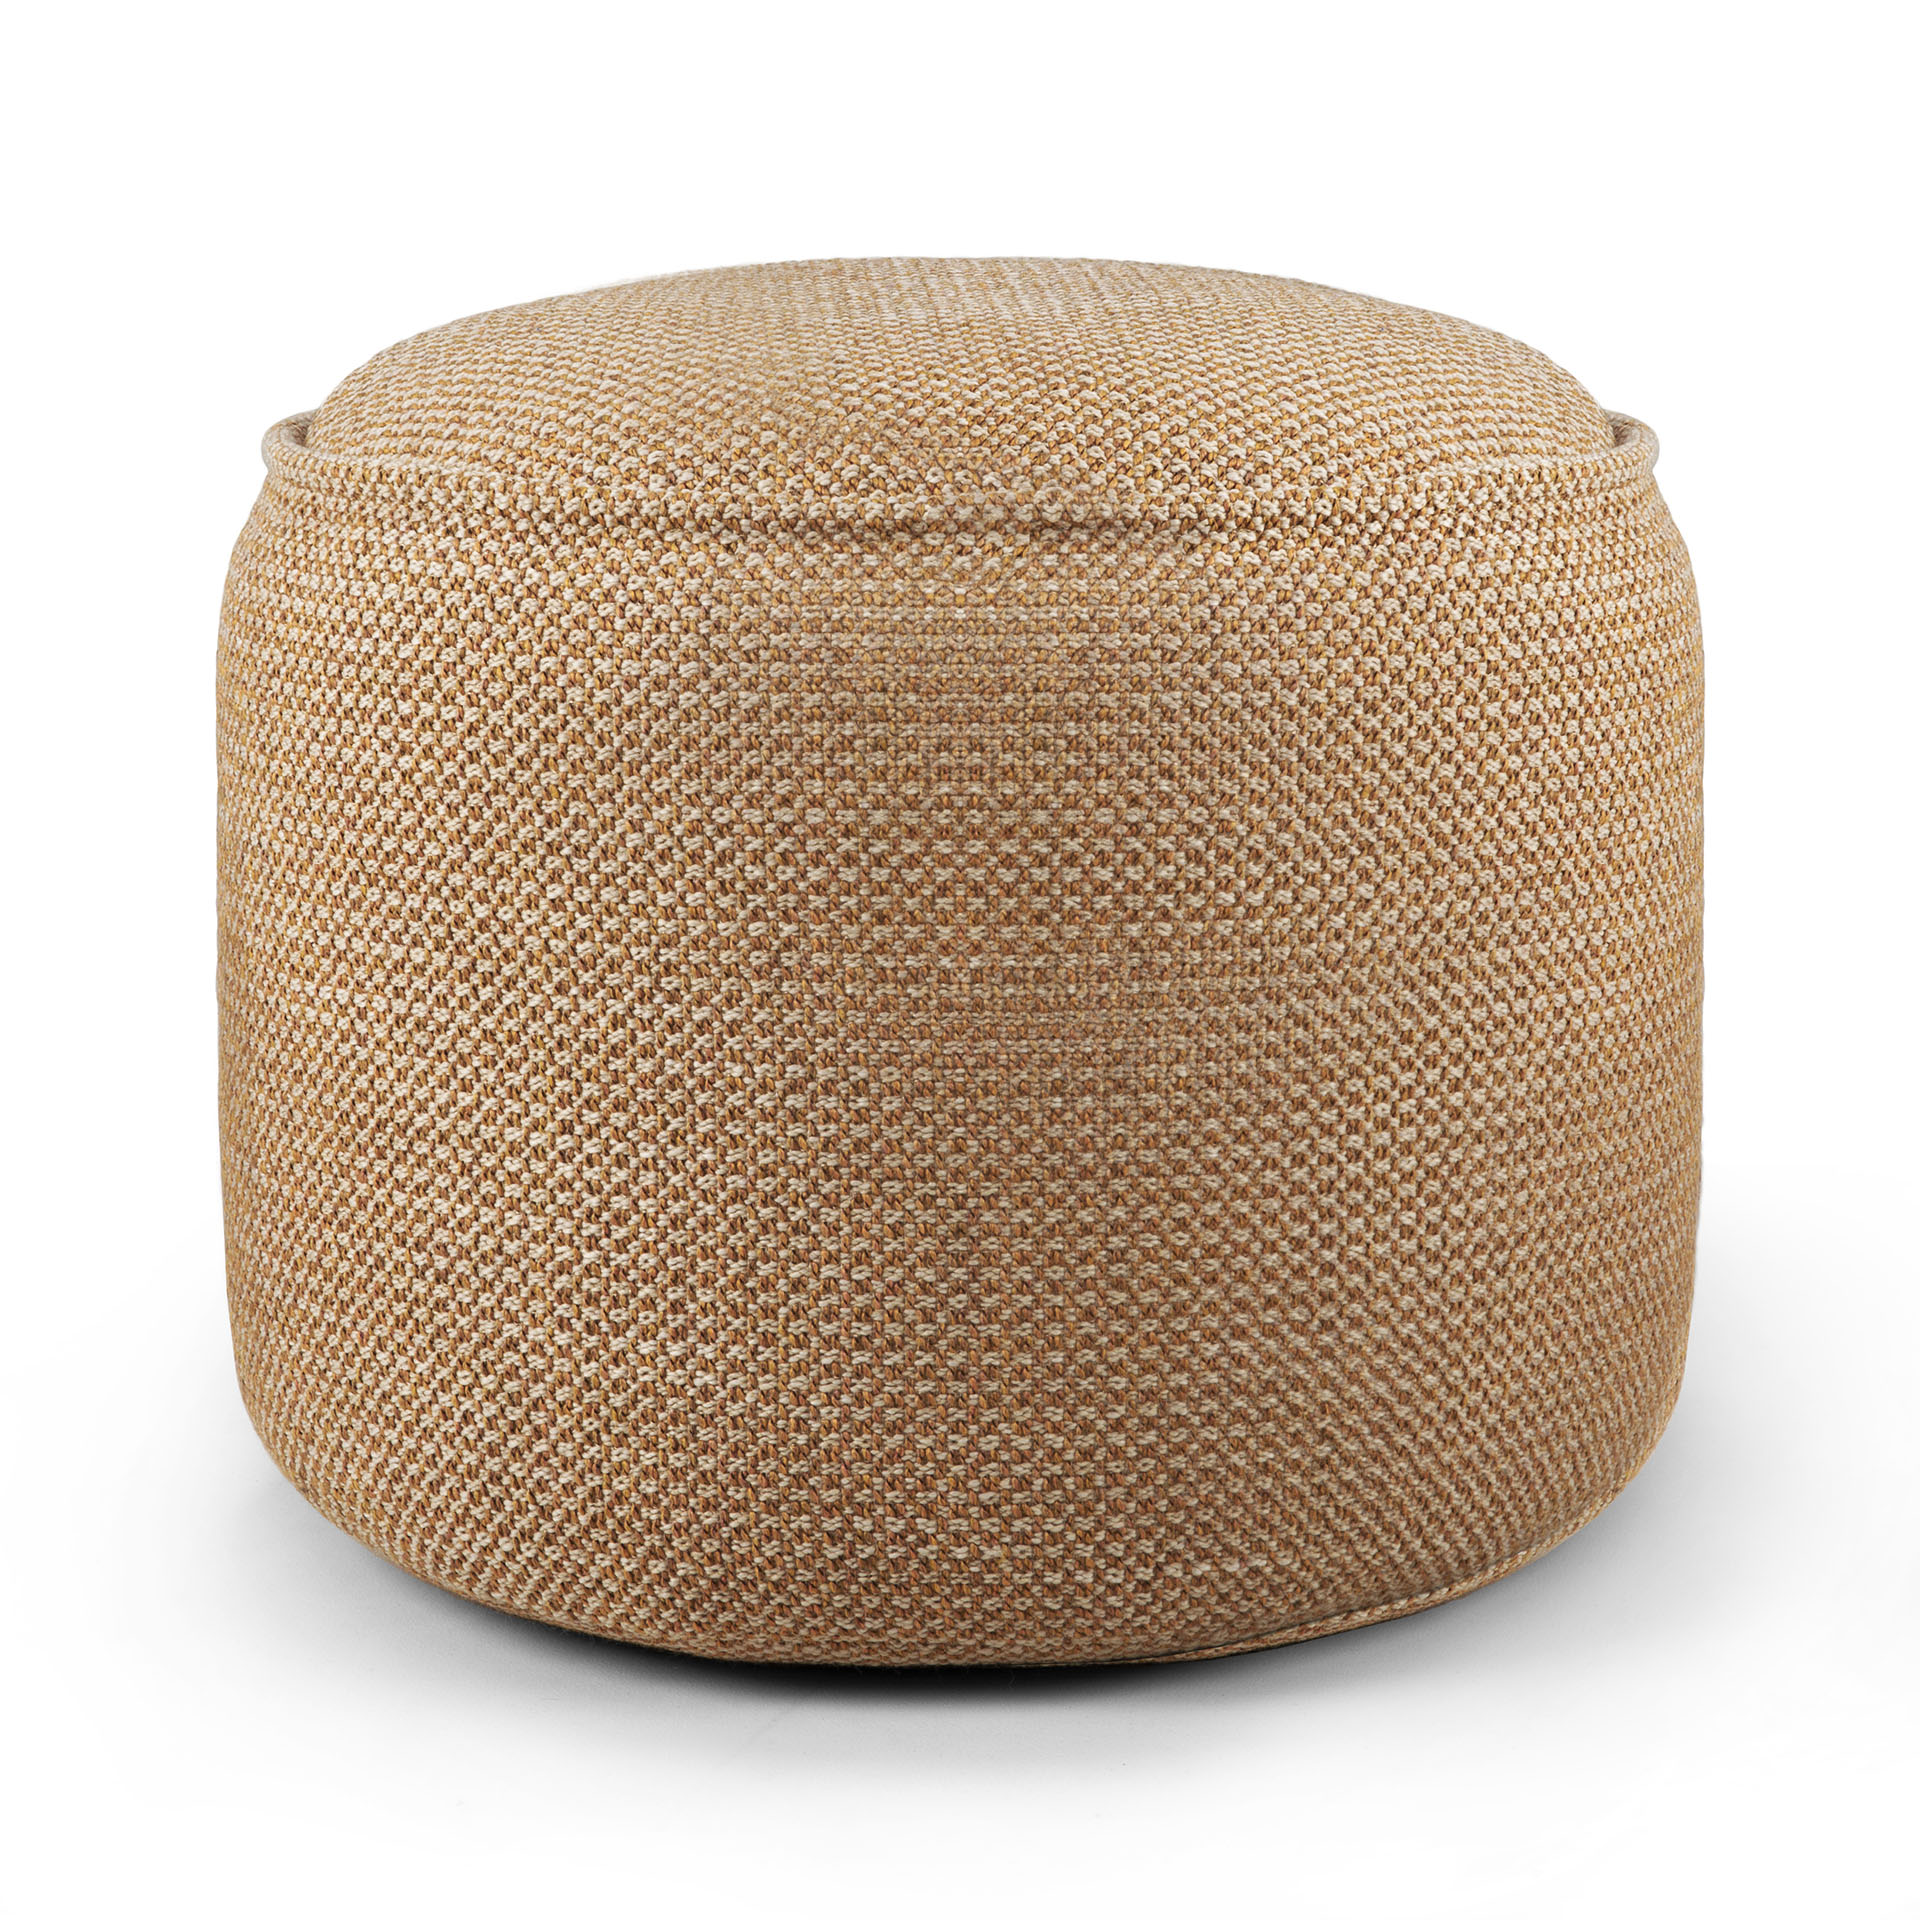 Donut_outdoor_pouf_checked_marsala_ethnicraft